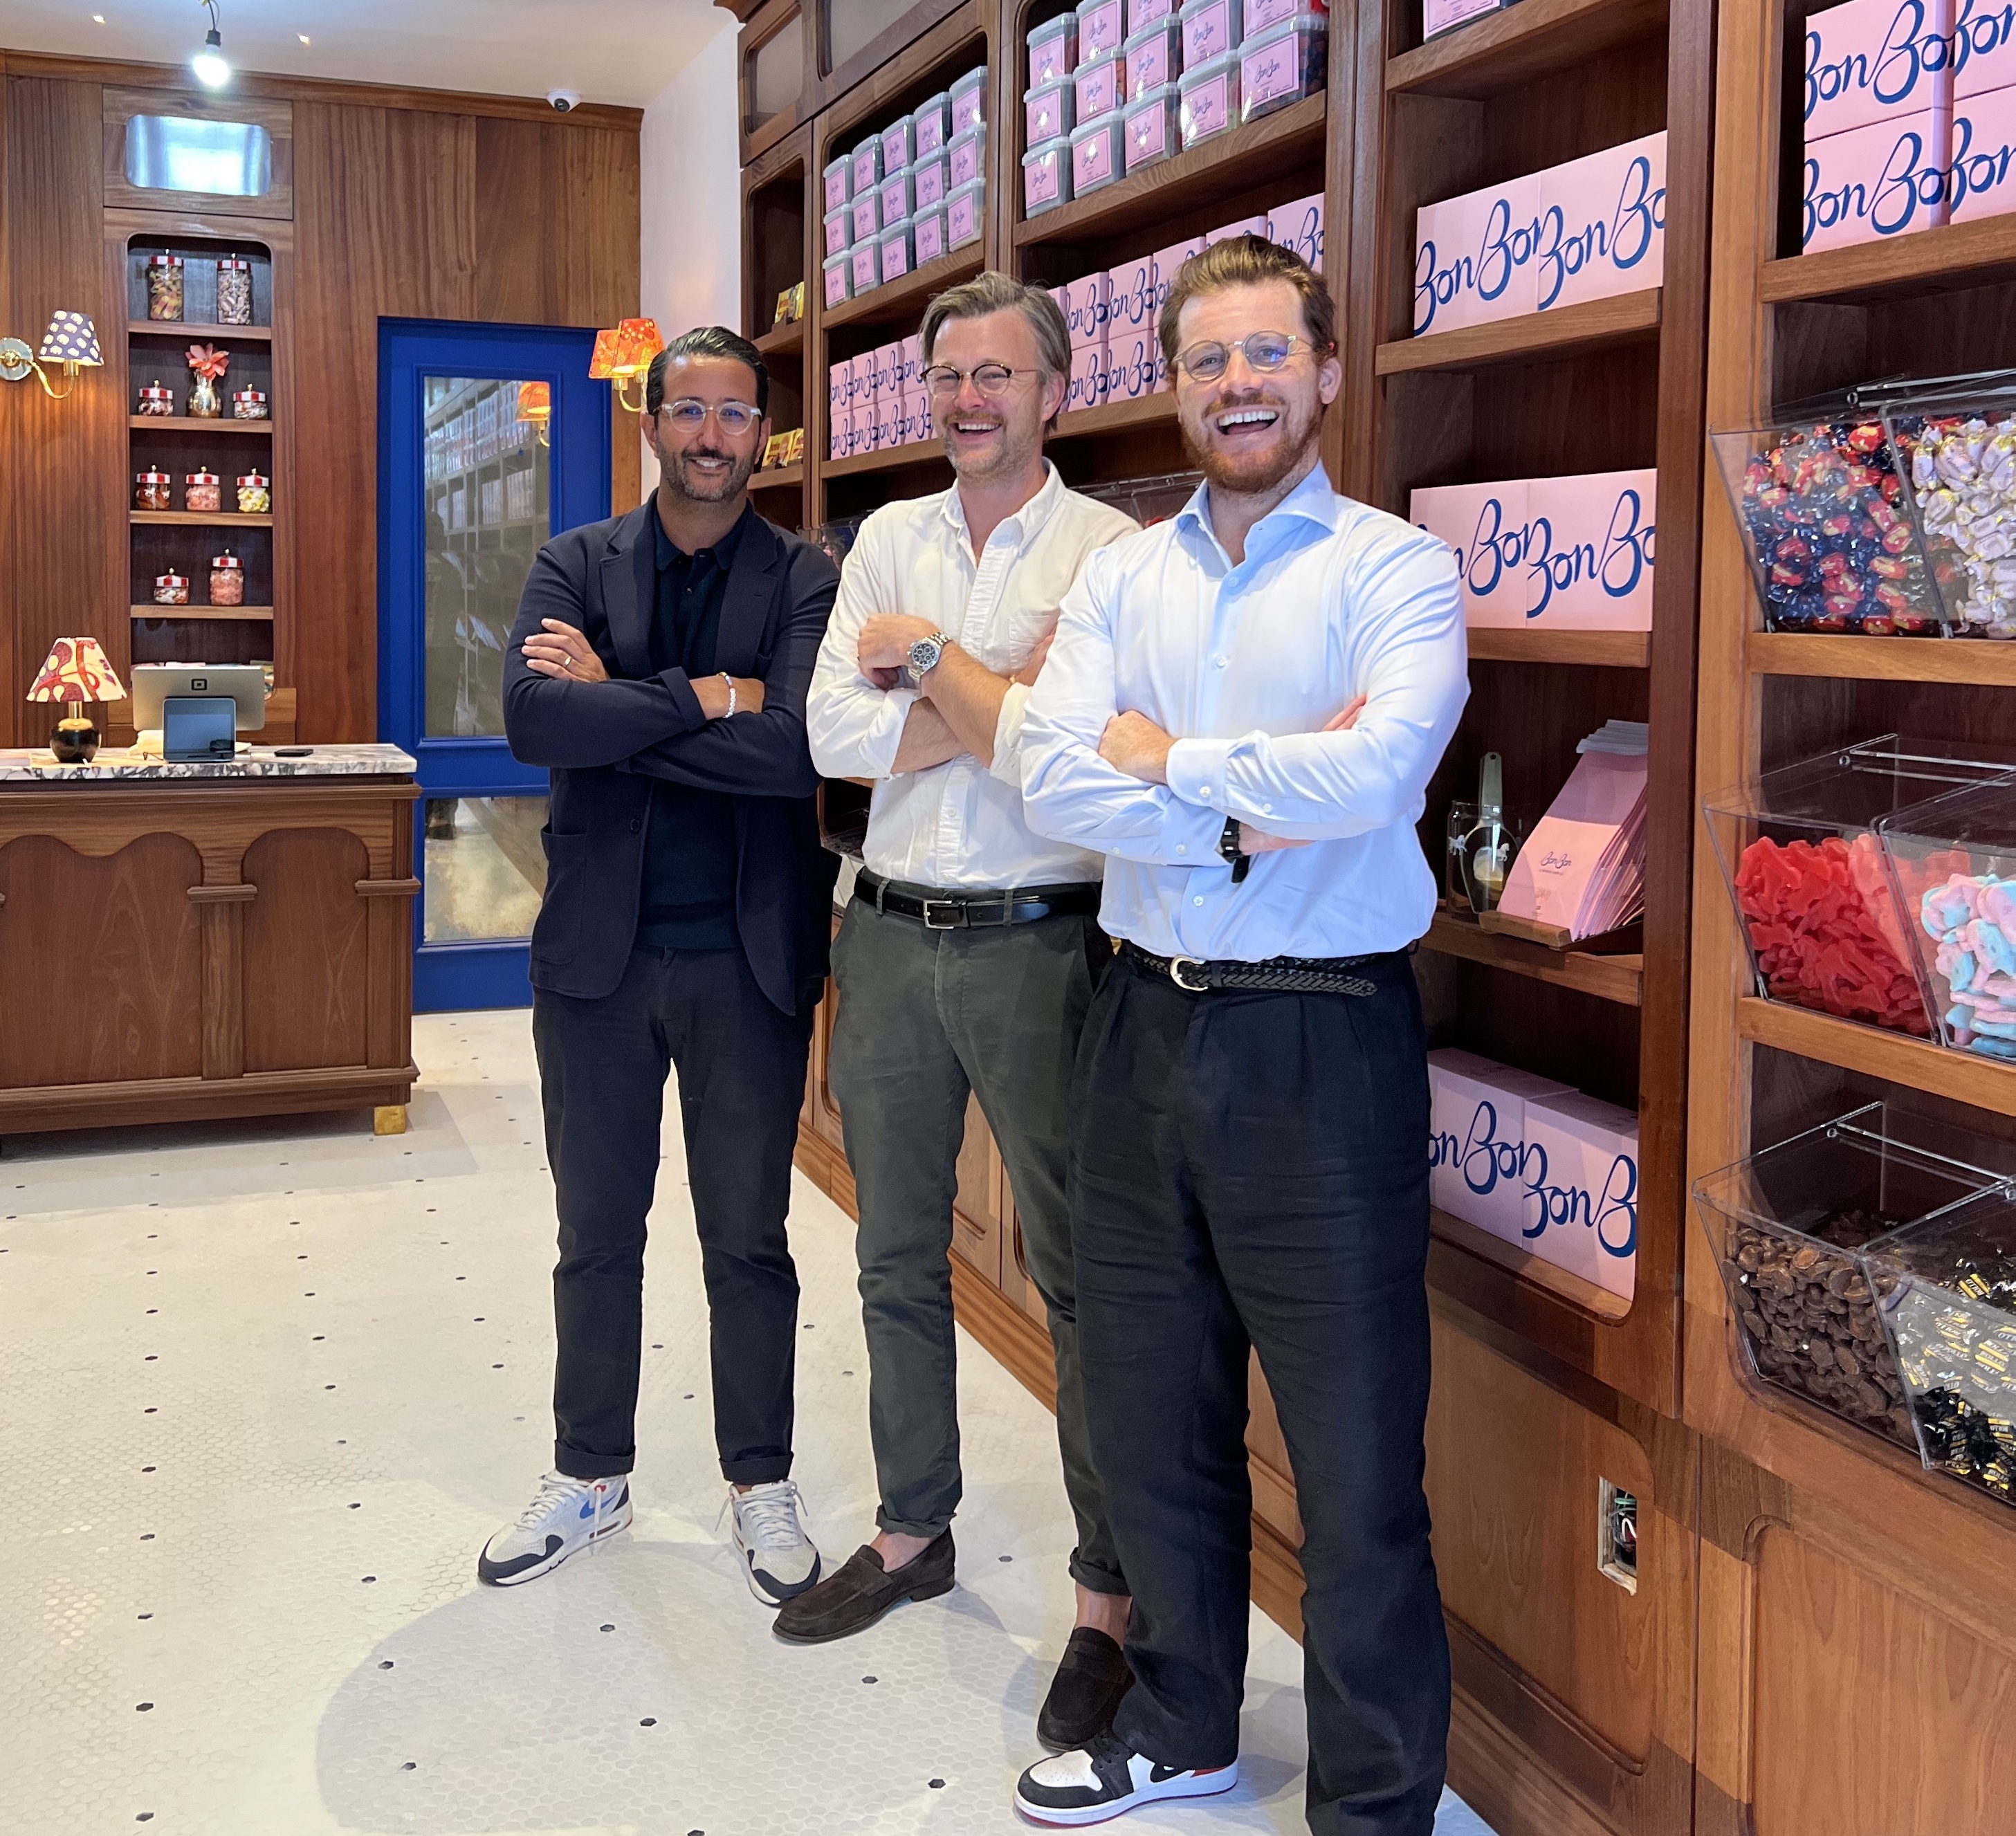 A portrait of the shop's owners Selim Adira, Bobby Persson and Leo Schaltz